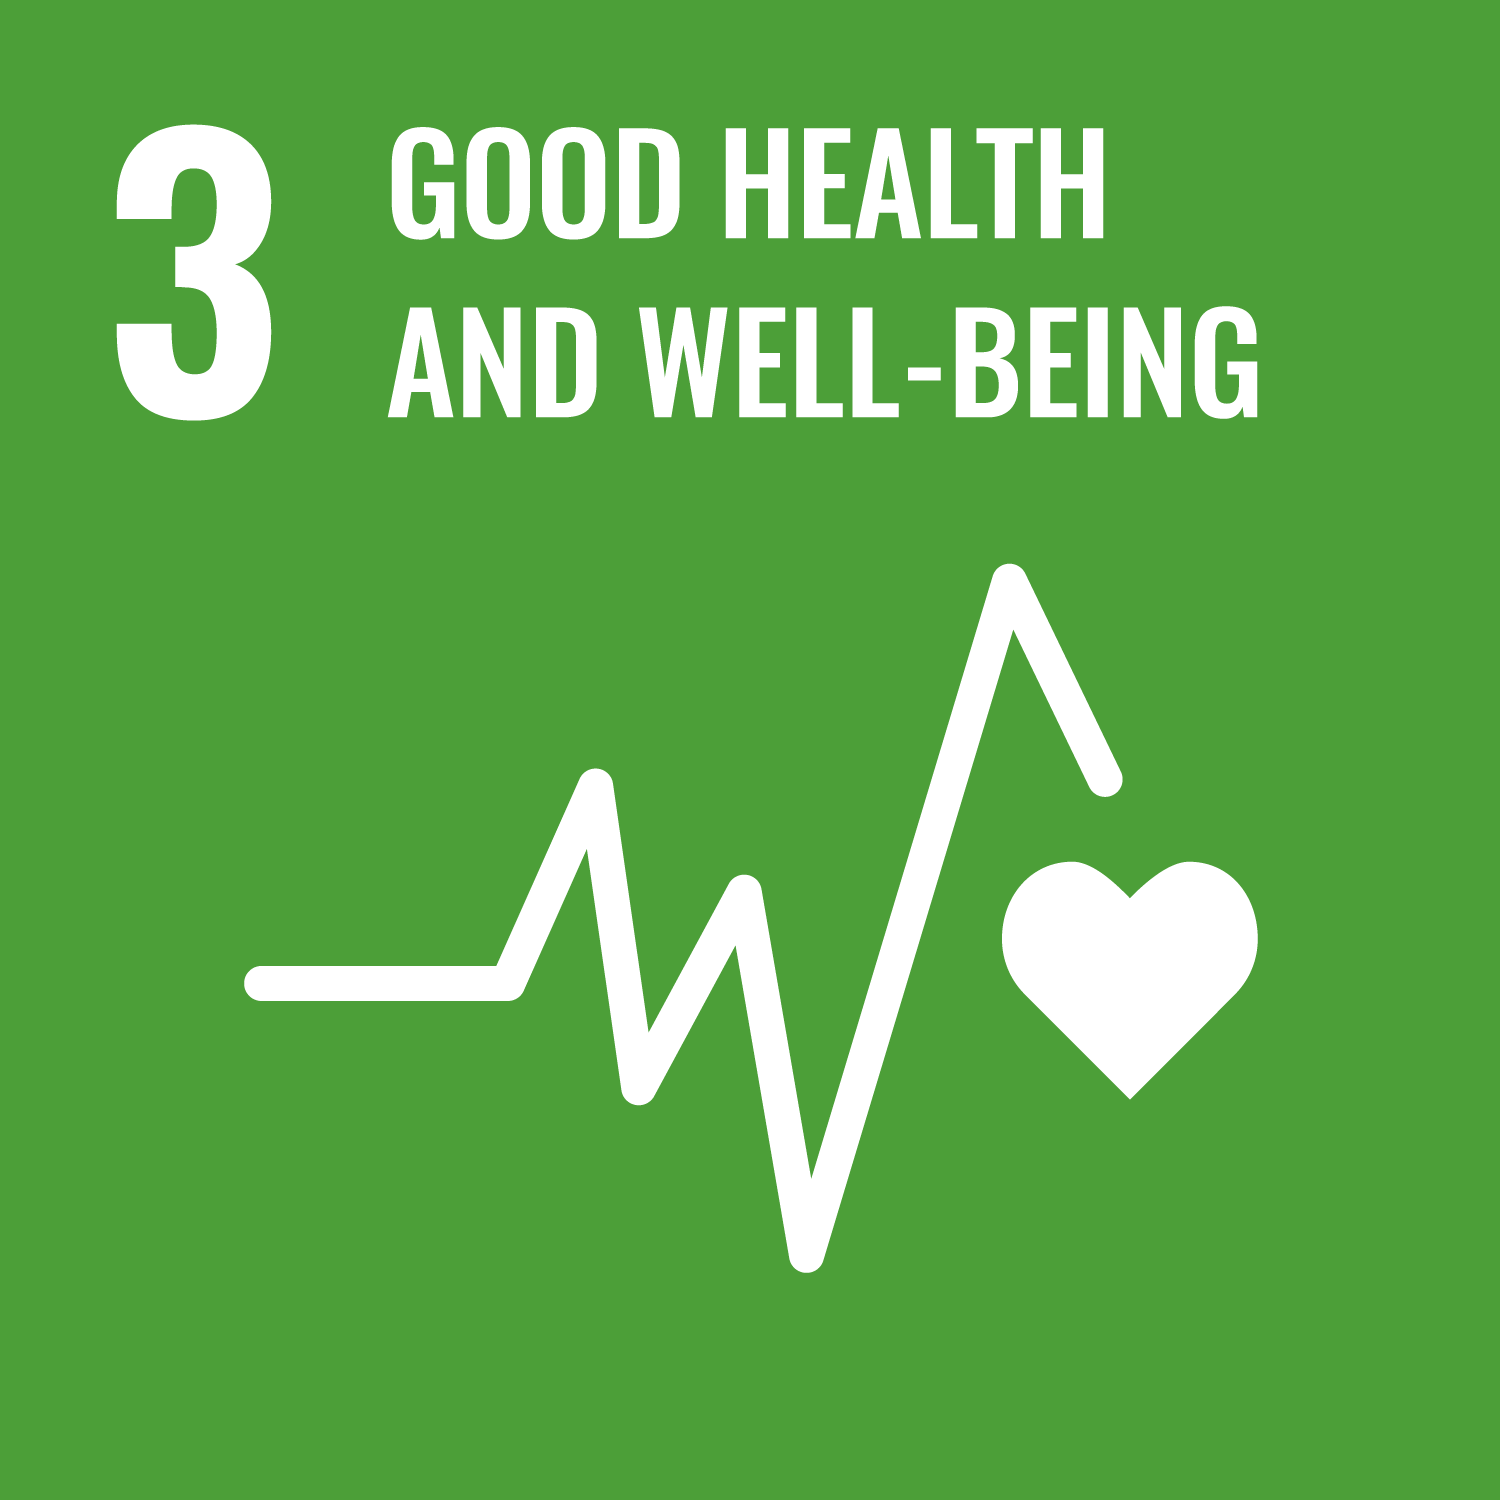 SDG 3: Health and Well-being